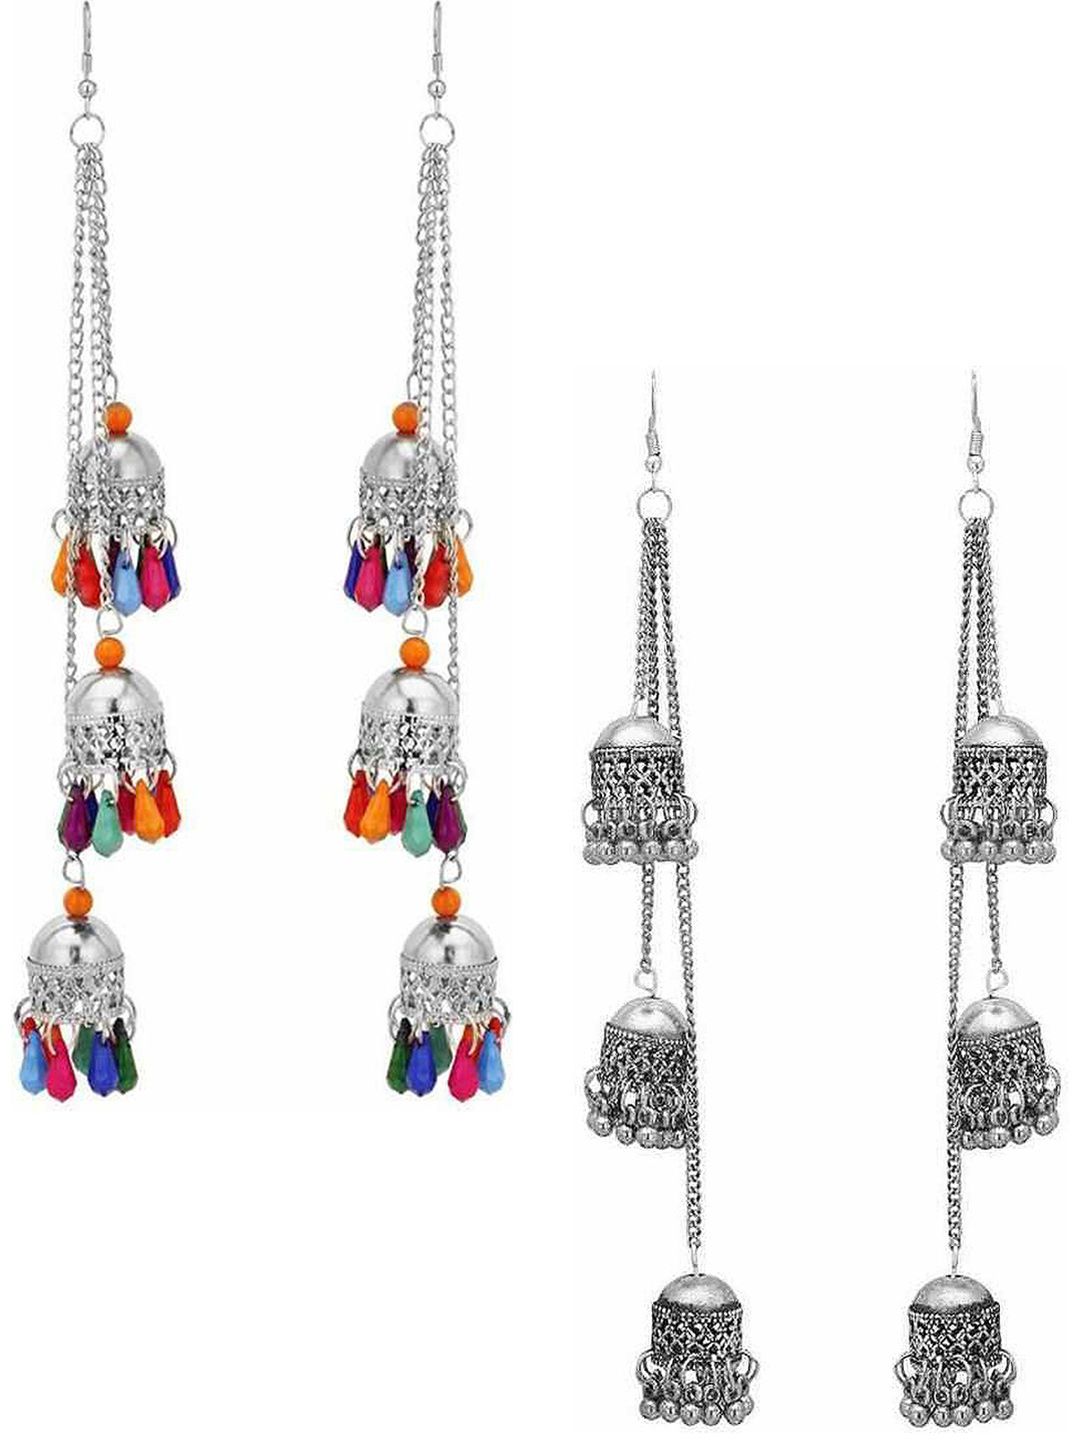 Vembley Set Of 2 Silver-Toned & Plated Dome Shaped Oxidised Jhumkas Earrings Price in India